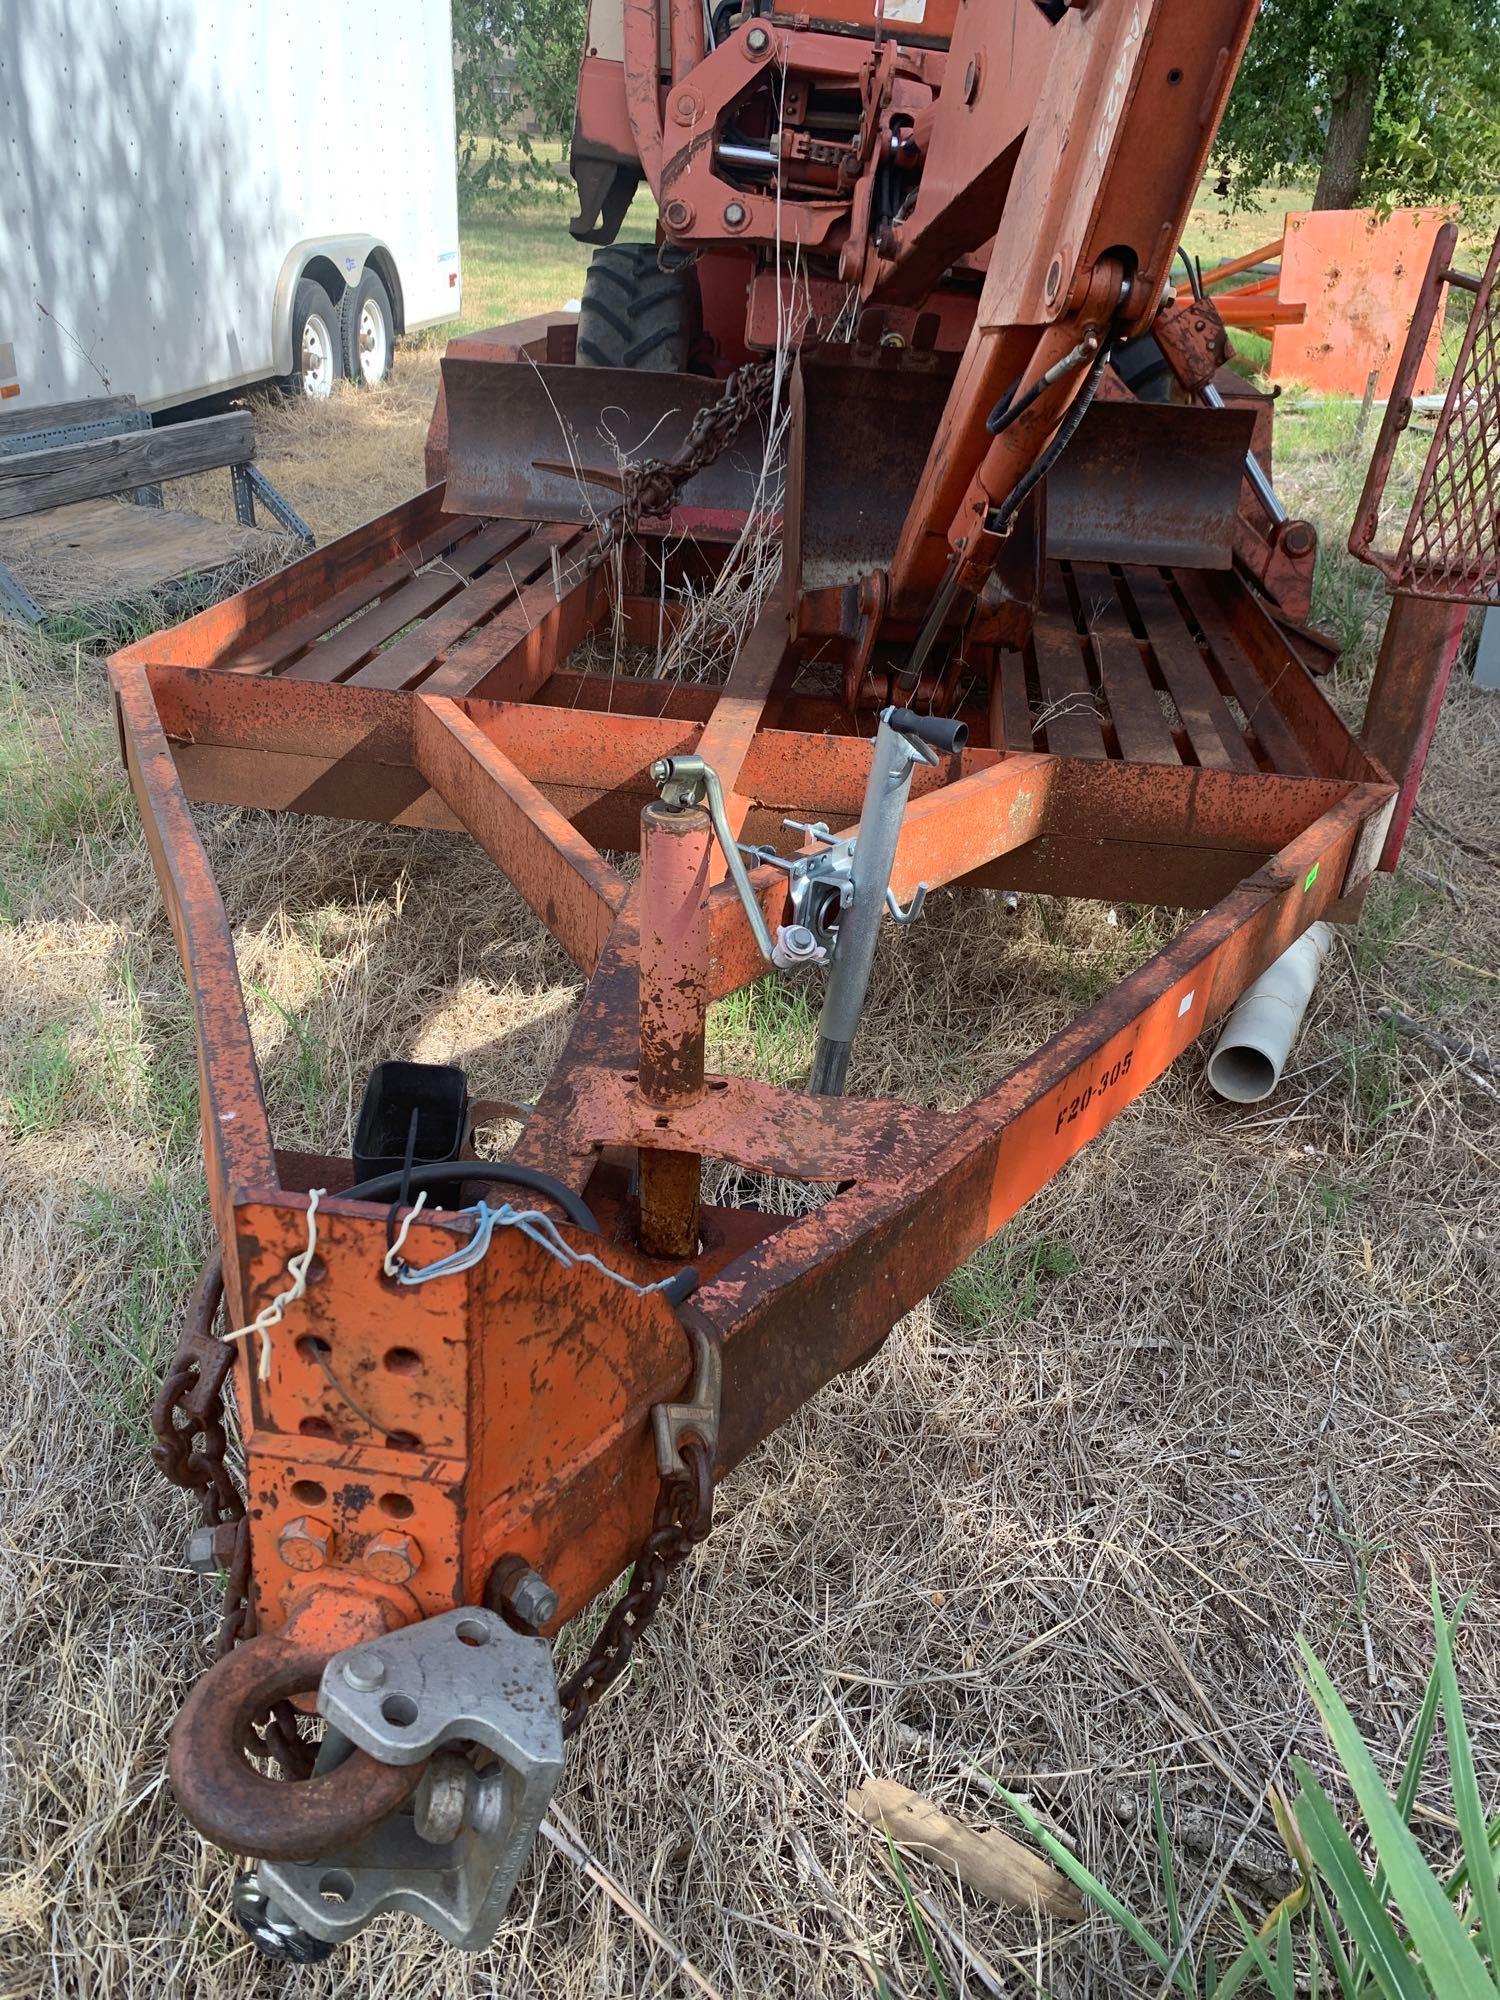 Ditch Witch 4500 trencher with A422 back hoe attachment needs battery